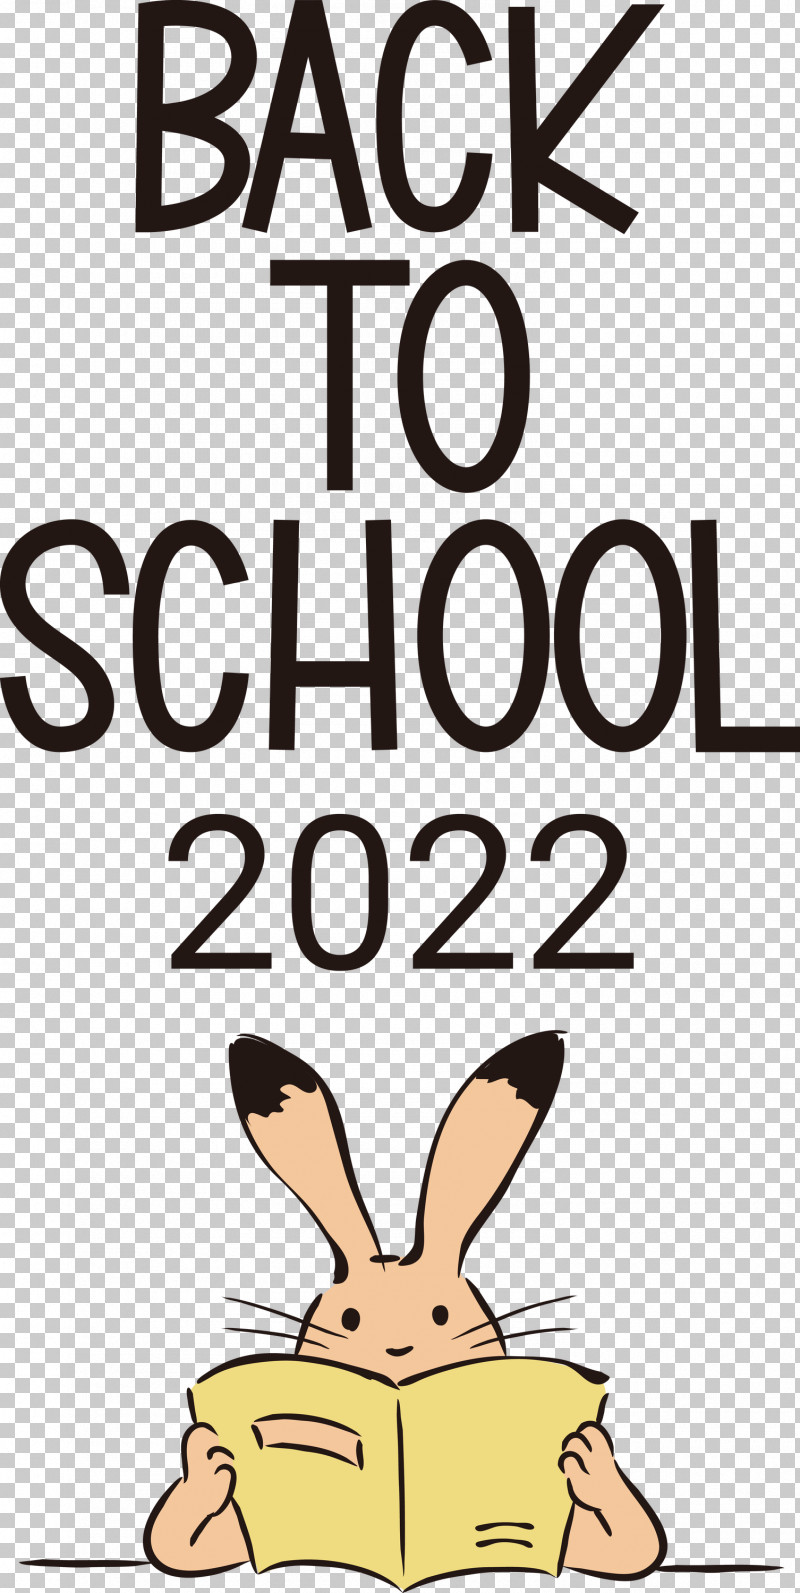 Back To School 2022 Education PNG, Clipart, Behavior, Cartoon, Education, Happiness, Human Free PNG Download